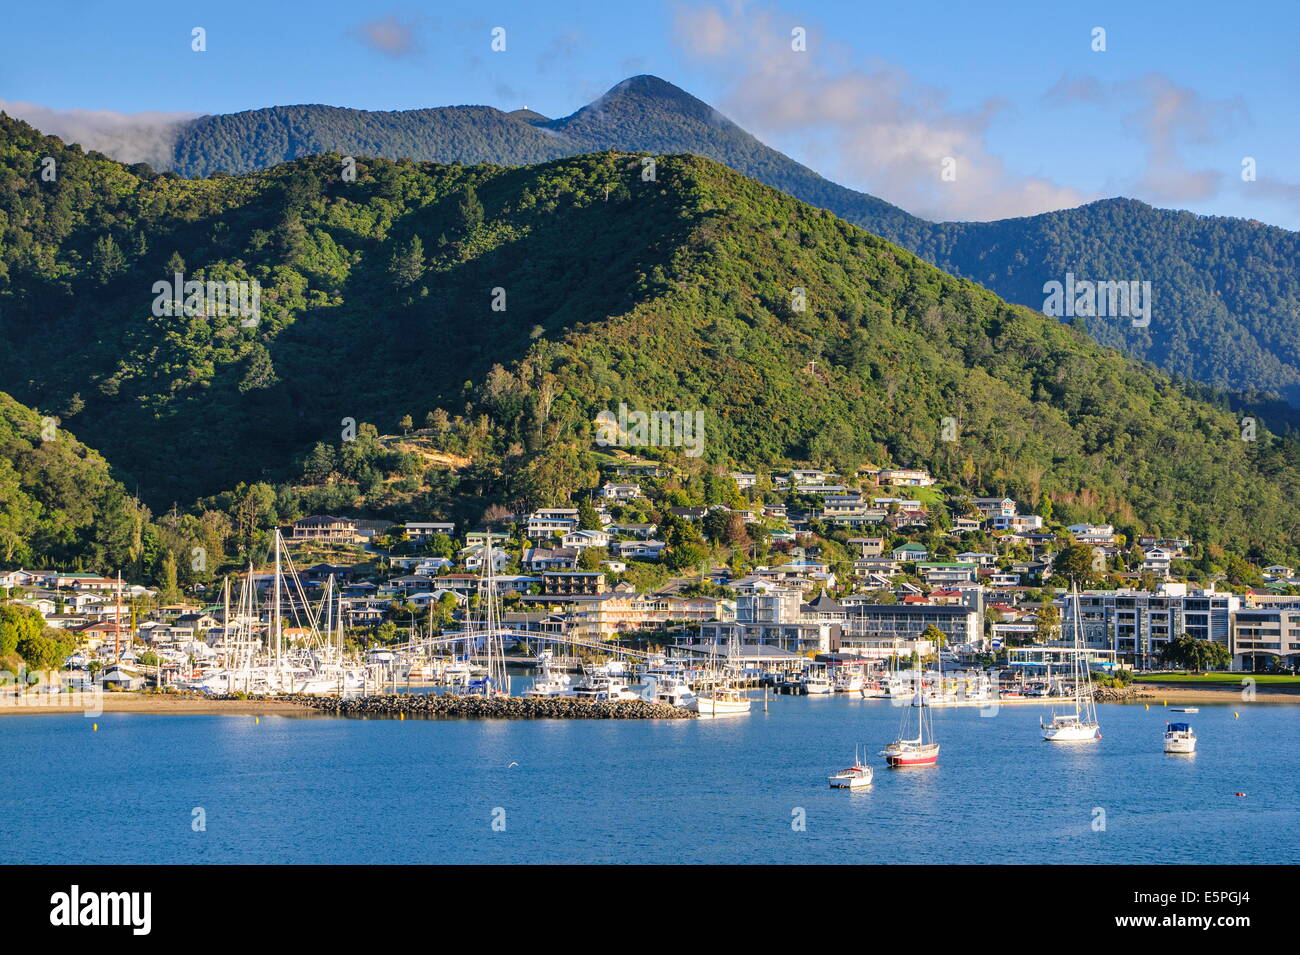 Harbour of Picton landing point of the ferry, Picton, Marlborough Region, South Island, New Zealand, Pacific Stock Photo